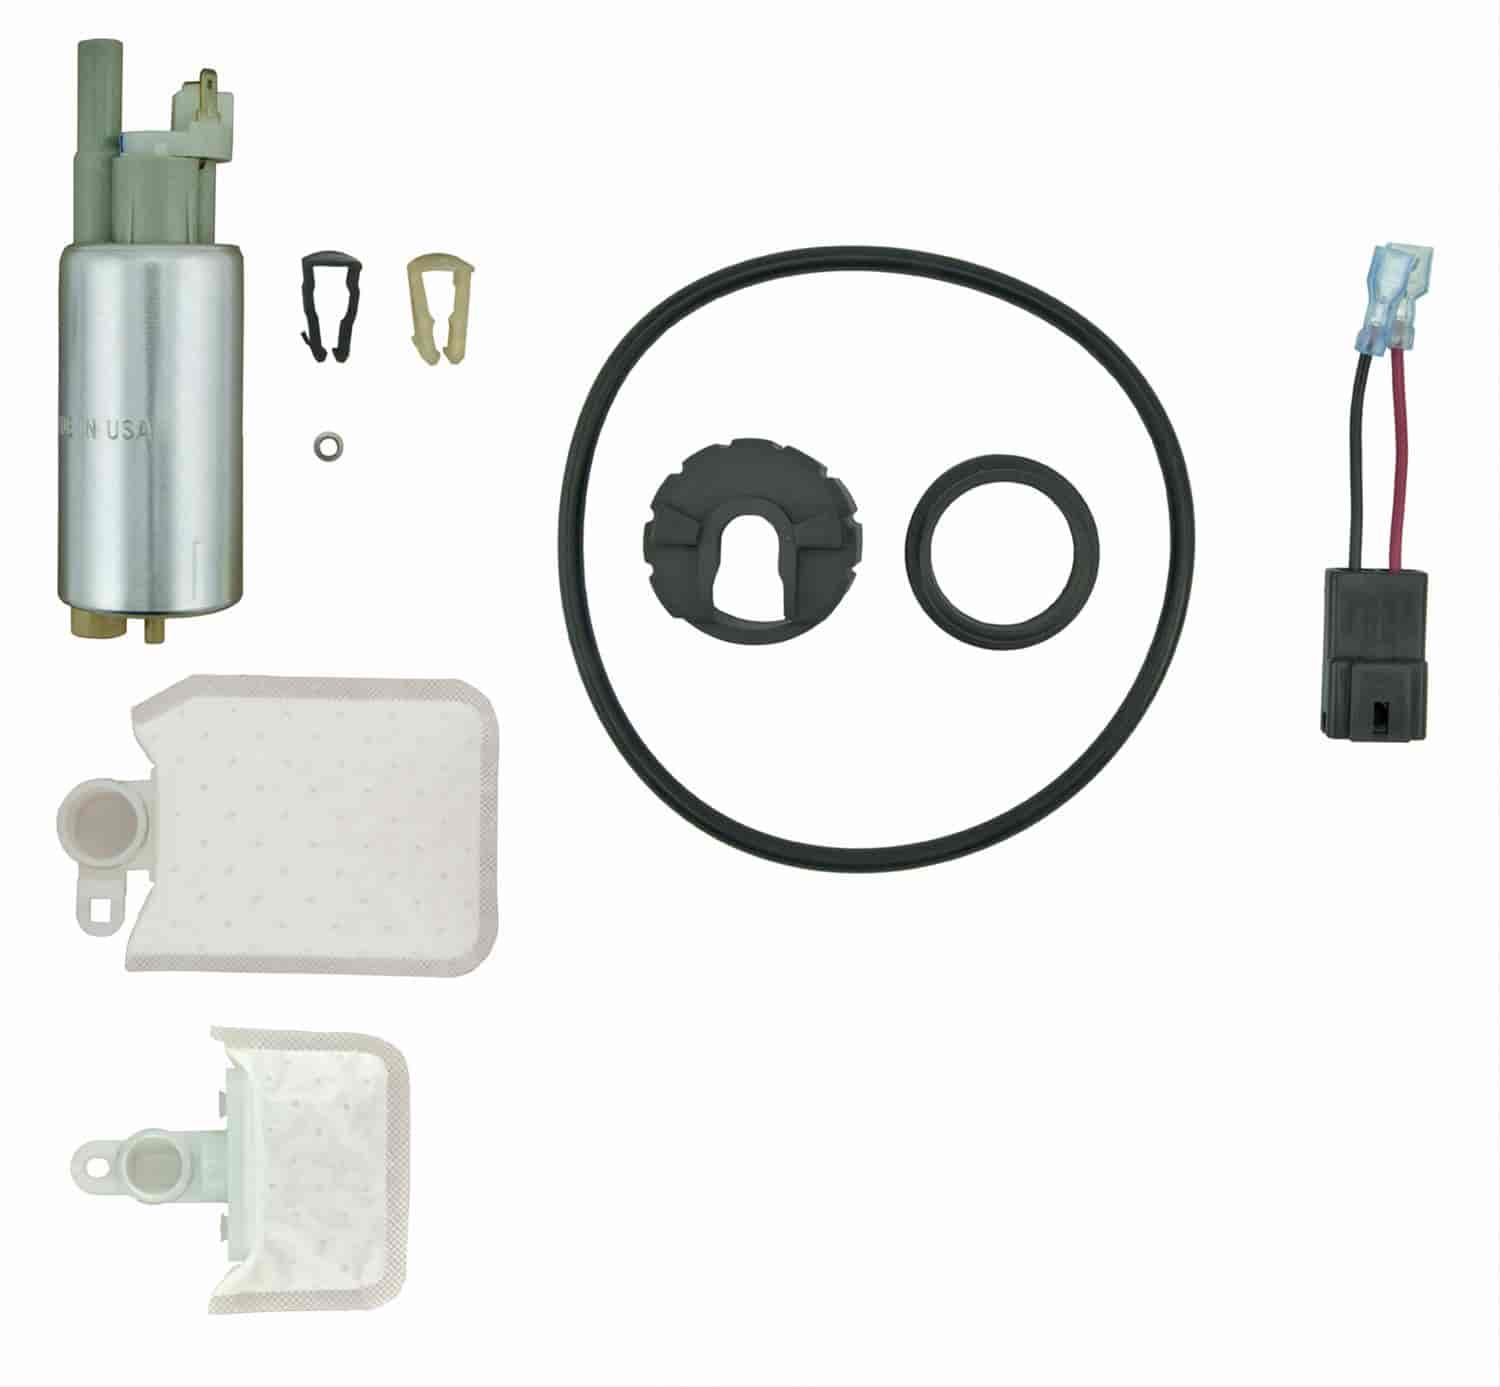 EFI In-Tank Electric Fuel Pump And Strainer Set for 1998-2002 Ford Escort/1998-1999 Mercury Tracer